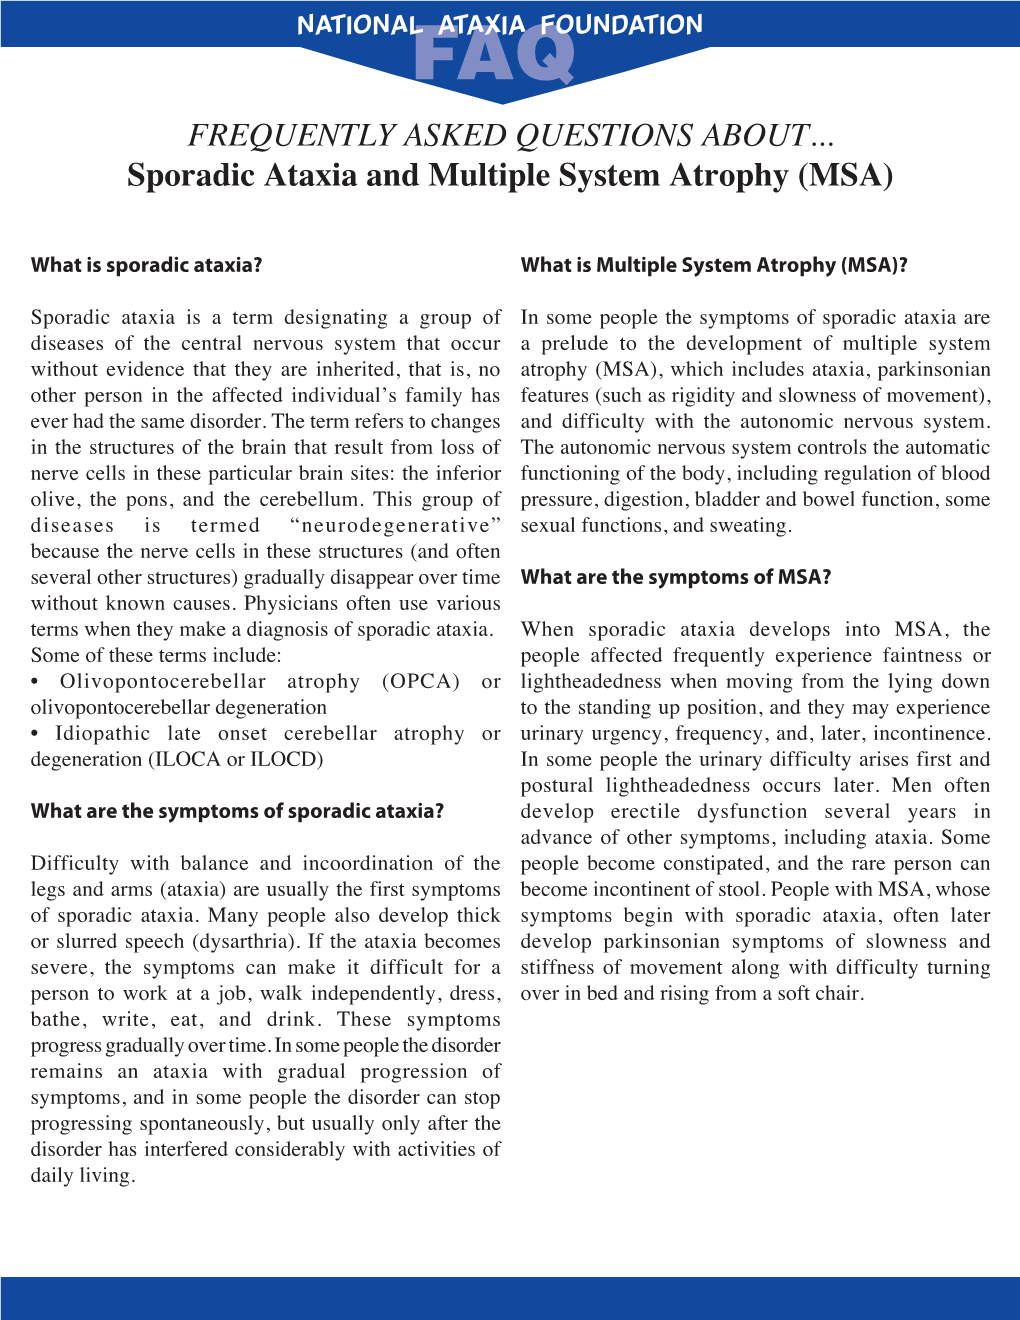 FREQUENTLY ASKED QUESTIONS ABOUT... Sporadic Ataxia and Multiple System Atrophy (MSA)